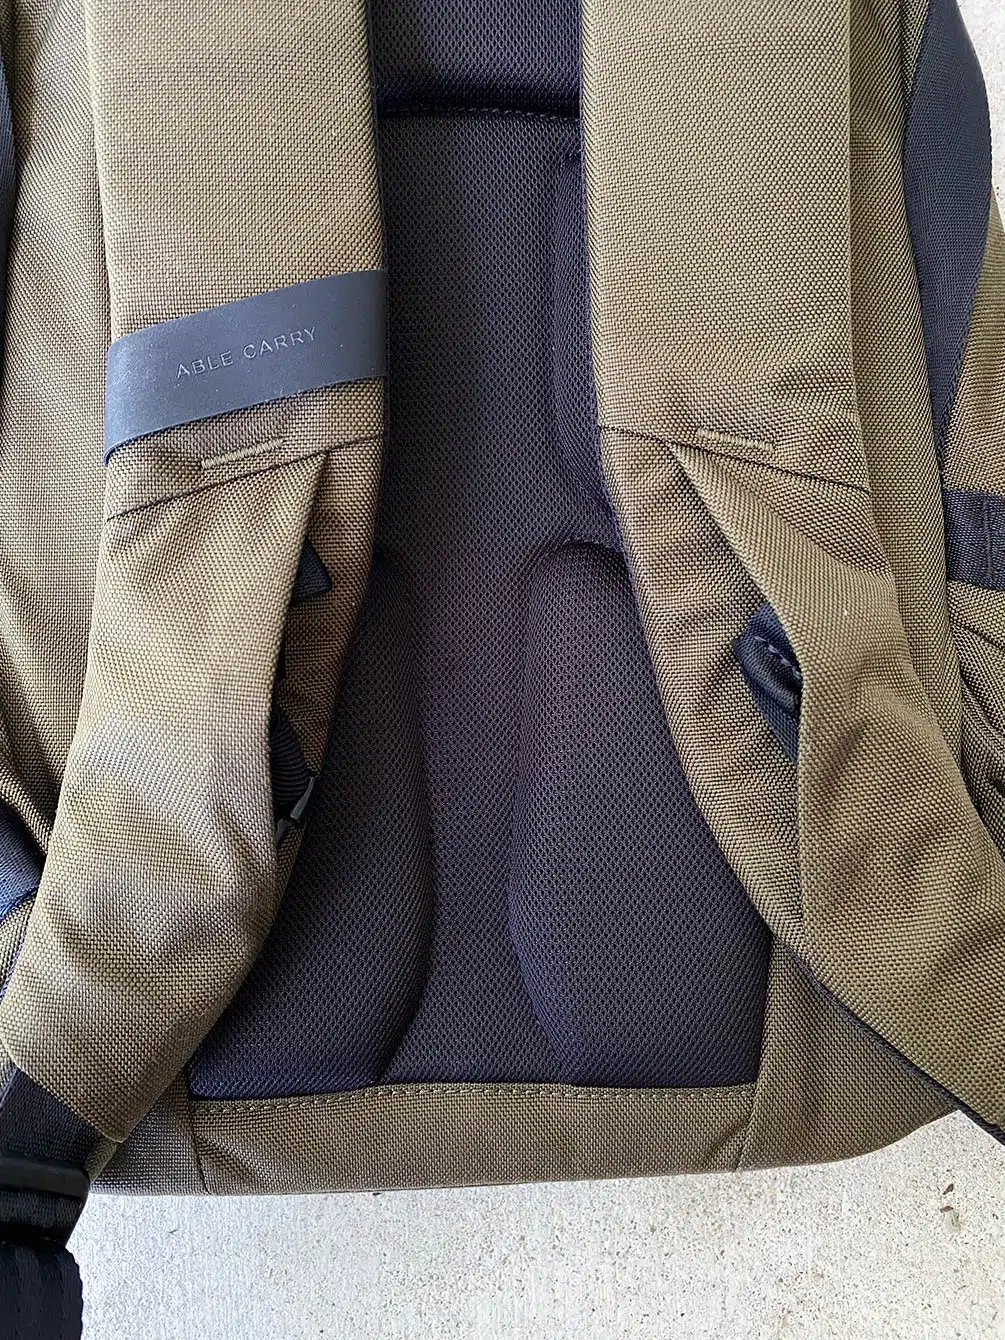 Able Carry Daily Backpack sternum straps tucked in